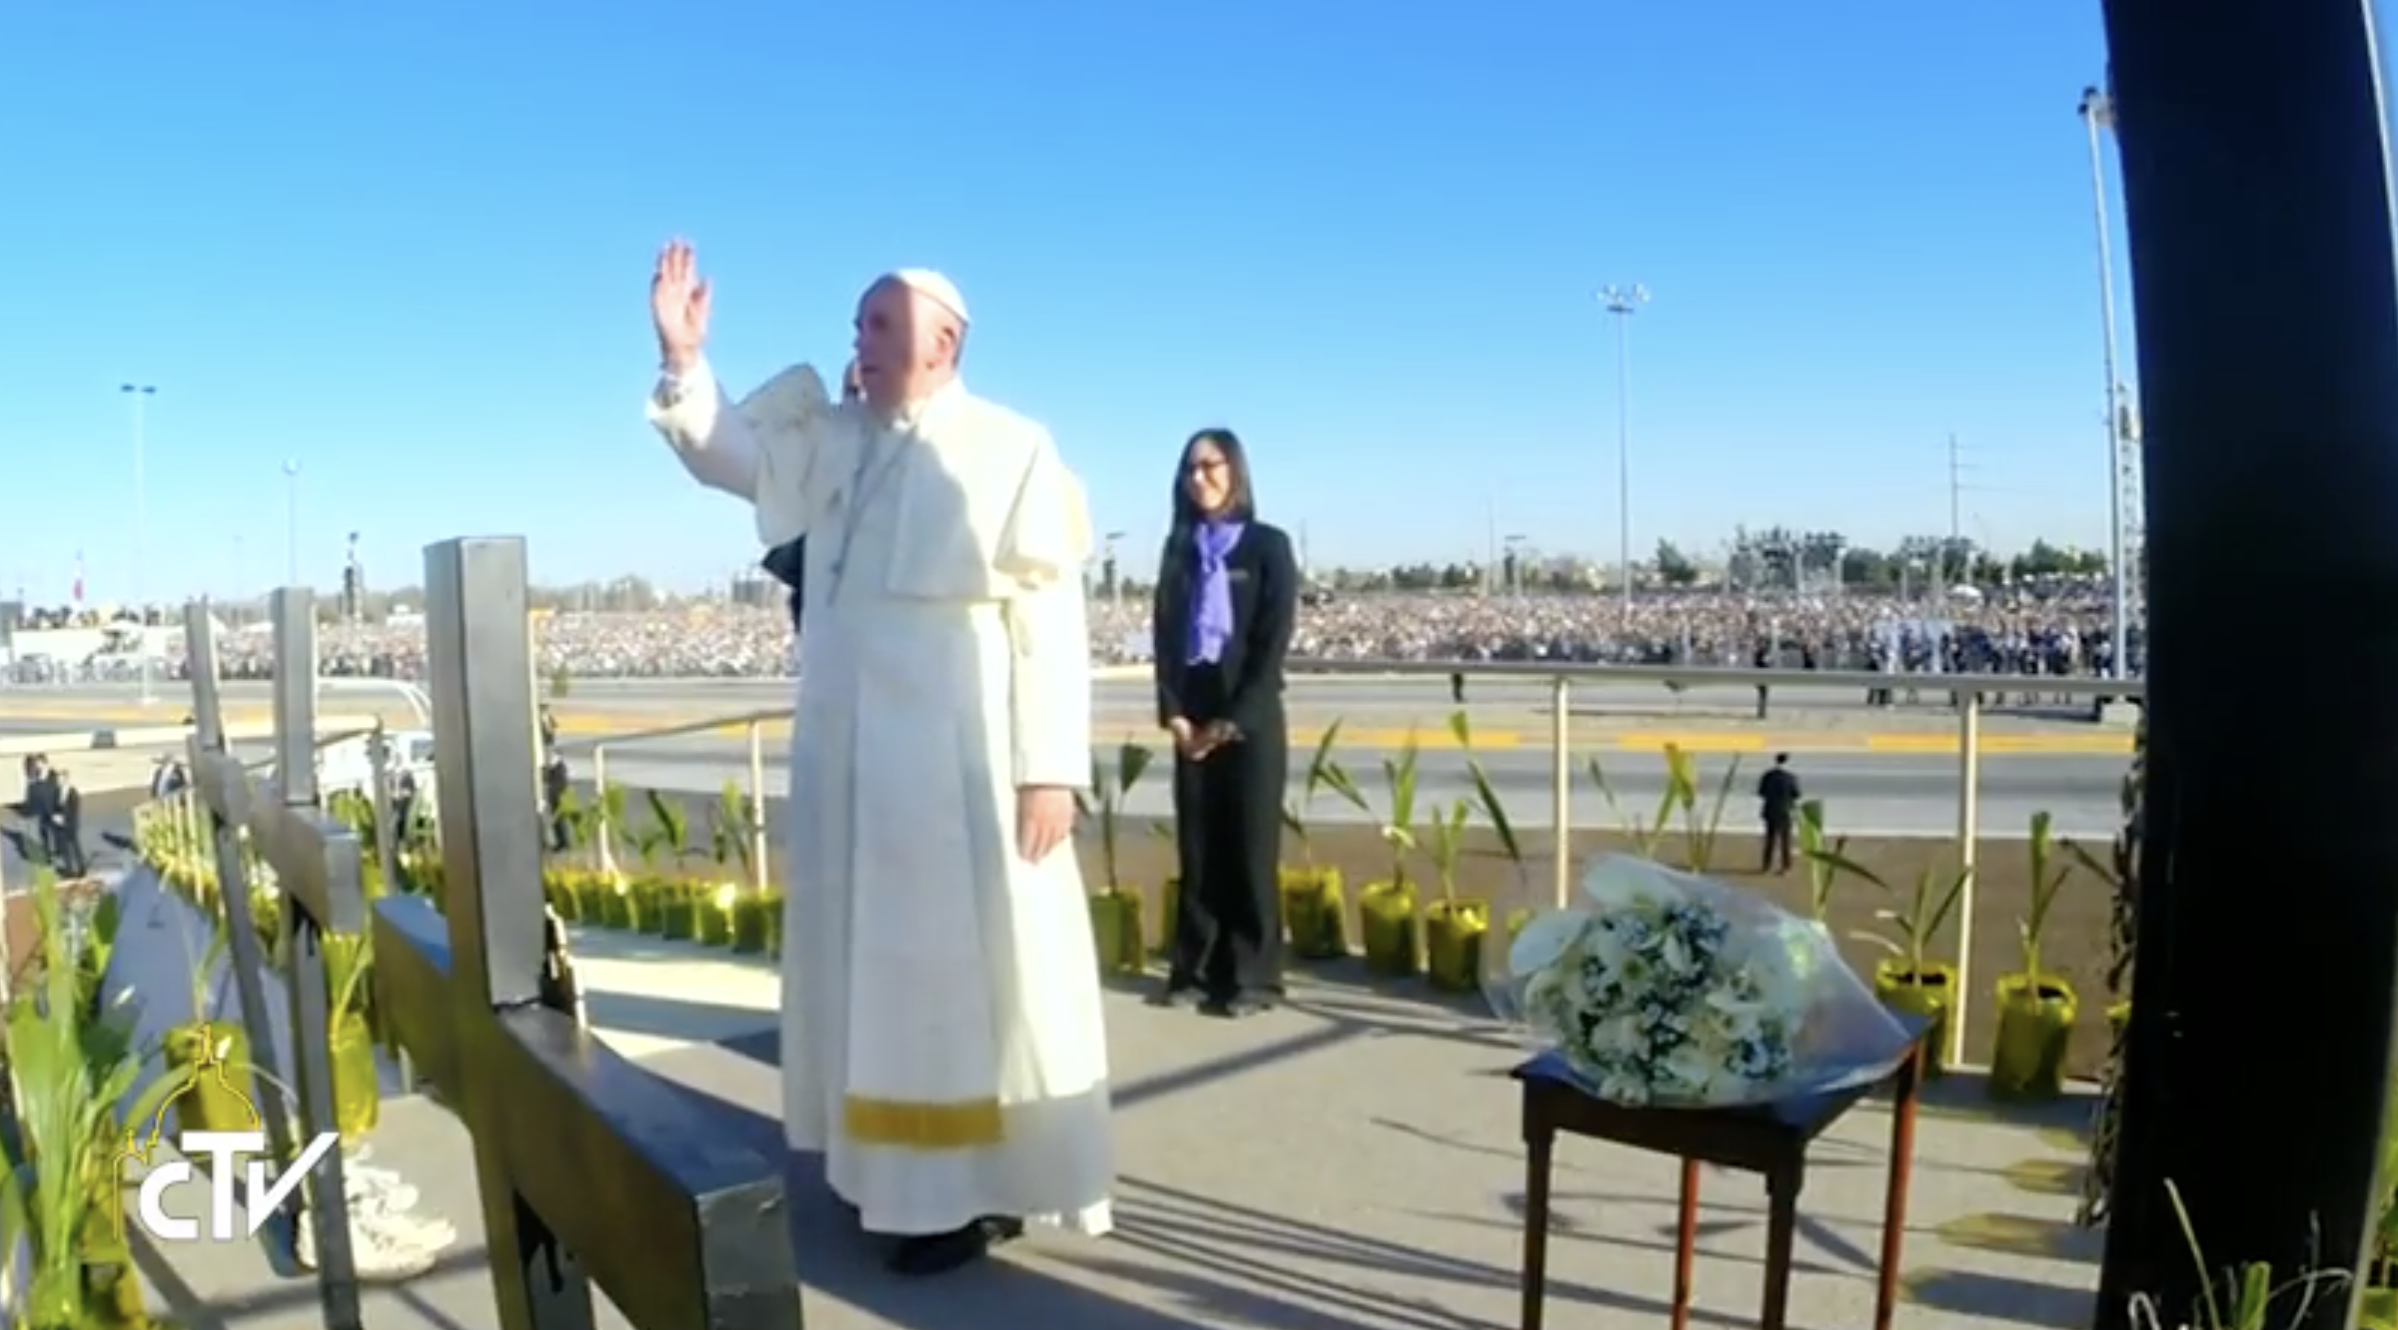 Pope Francis blessing those on the US side of border